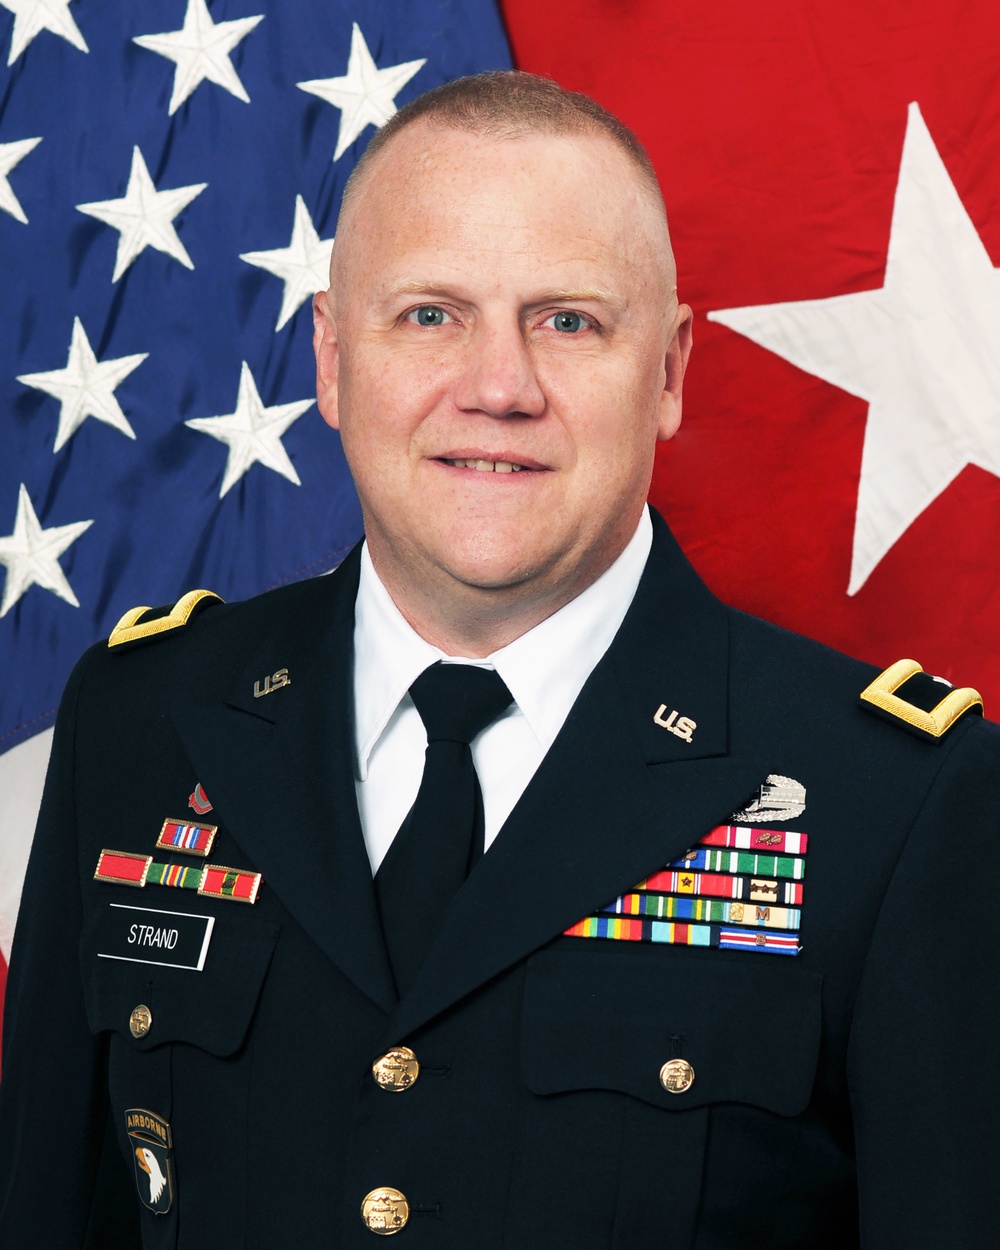 Brigadier General Stephen E. Strand United States Army Reserve (USAR) Deputy Commanding General, 88th Regional Support Command Fort McCoy, WI